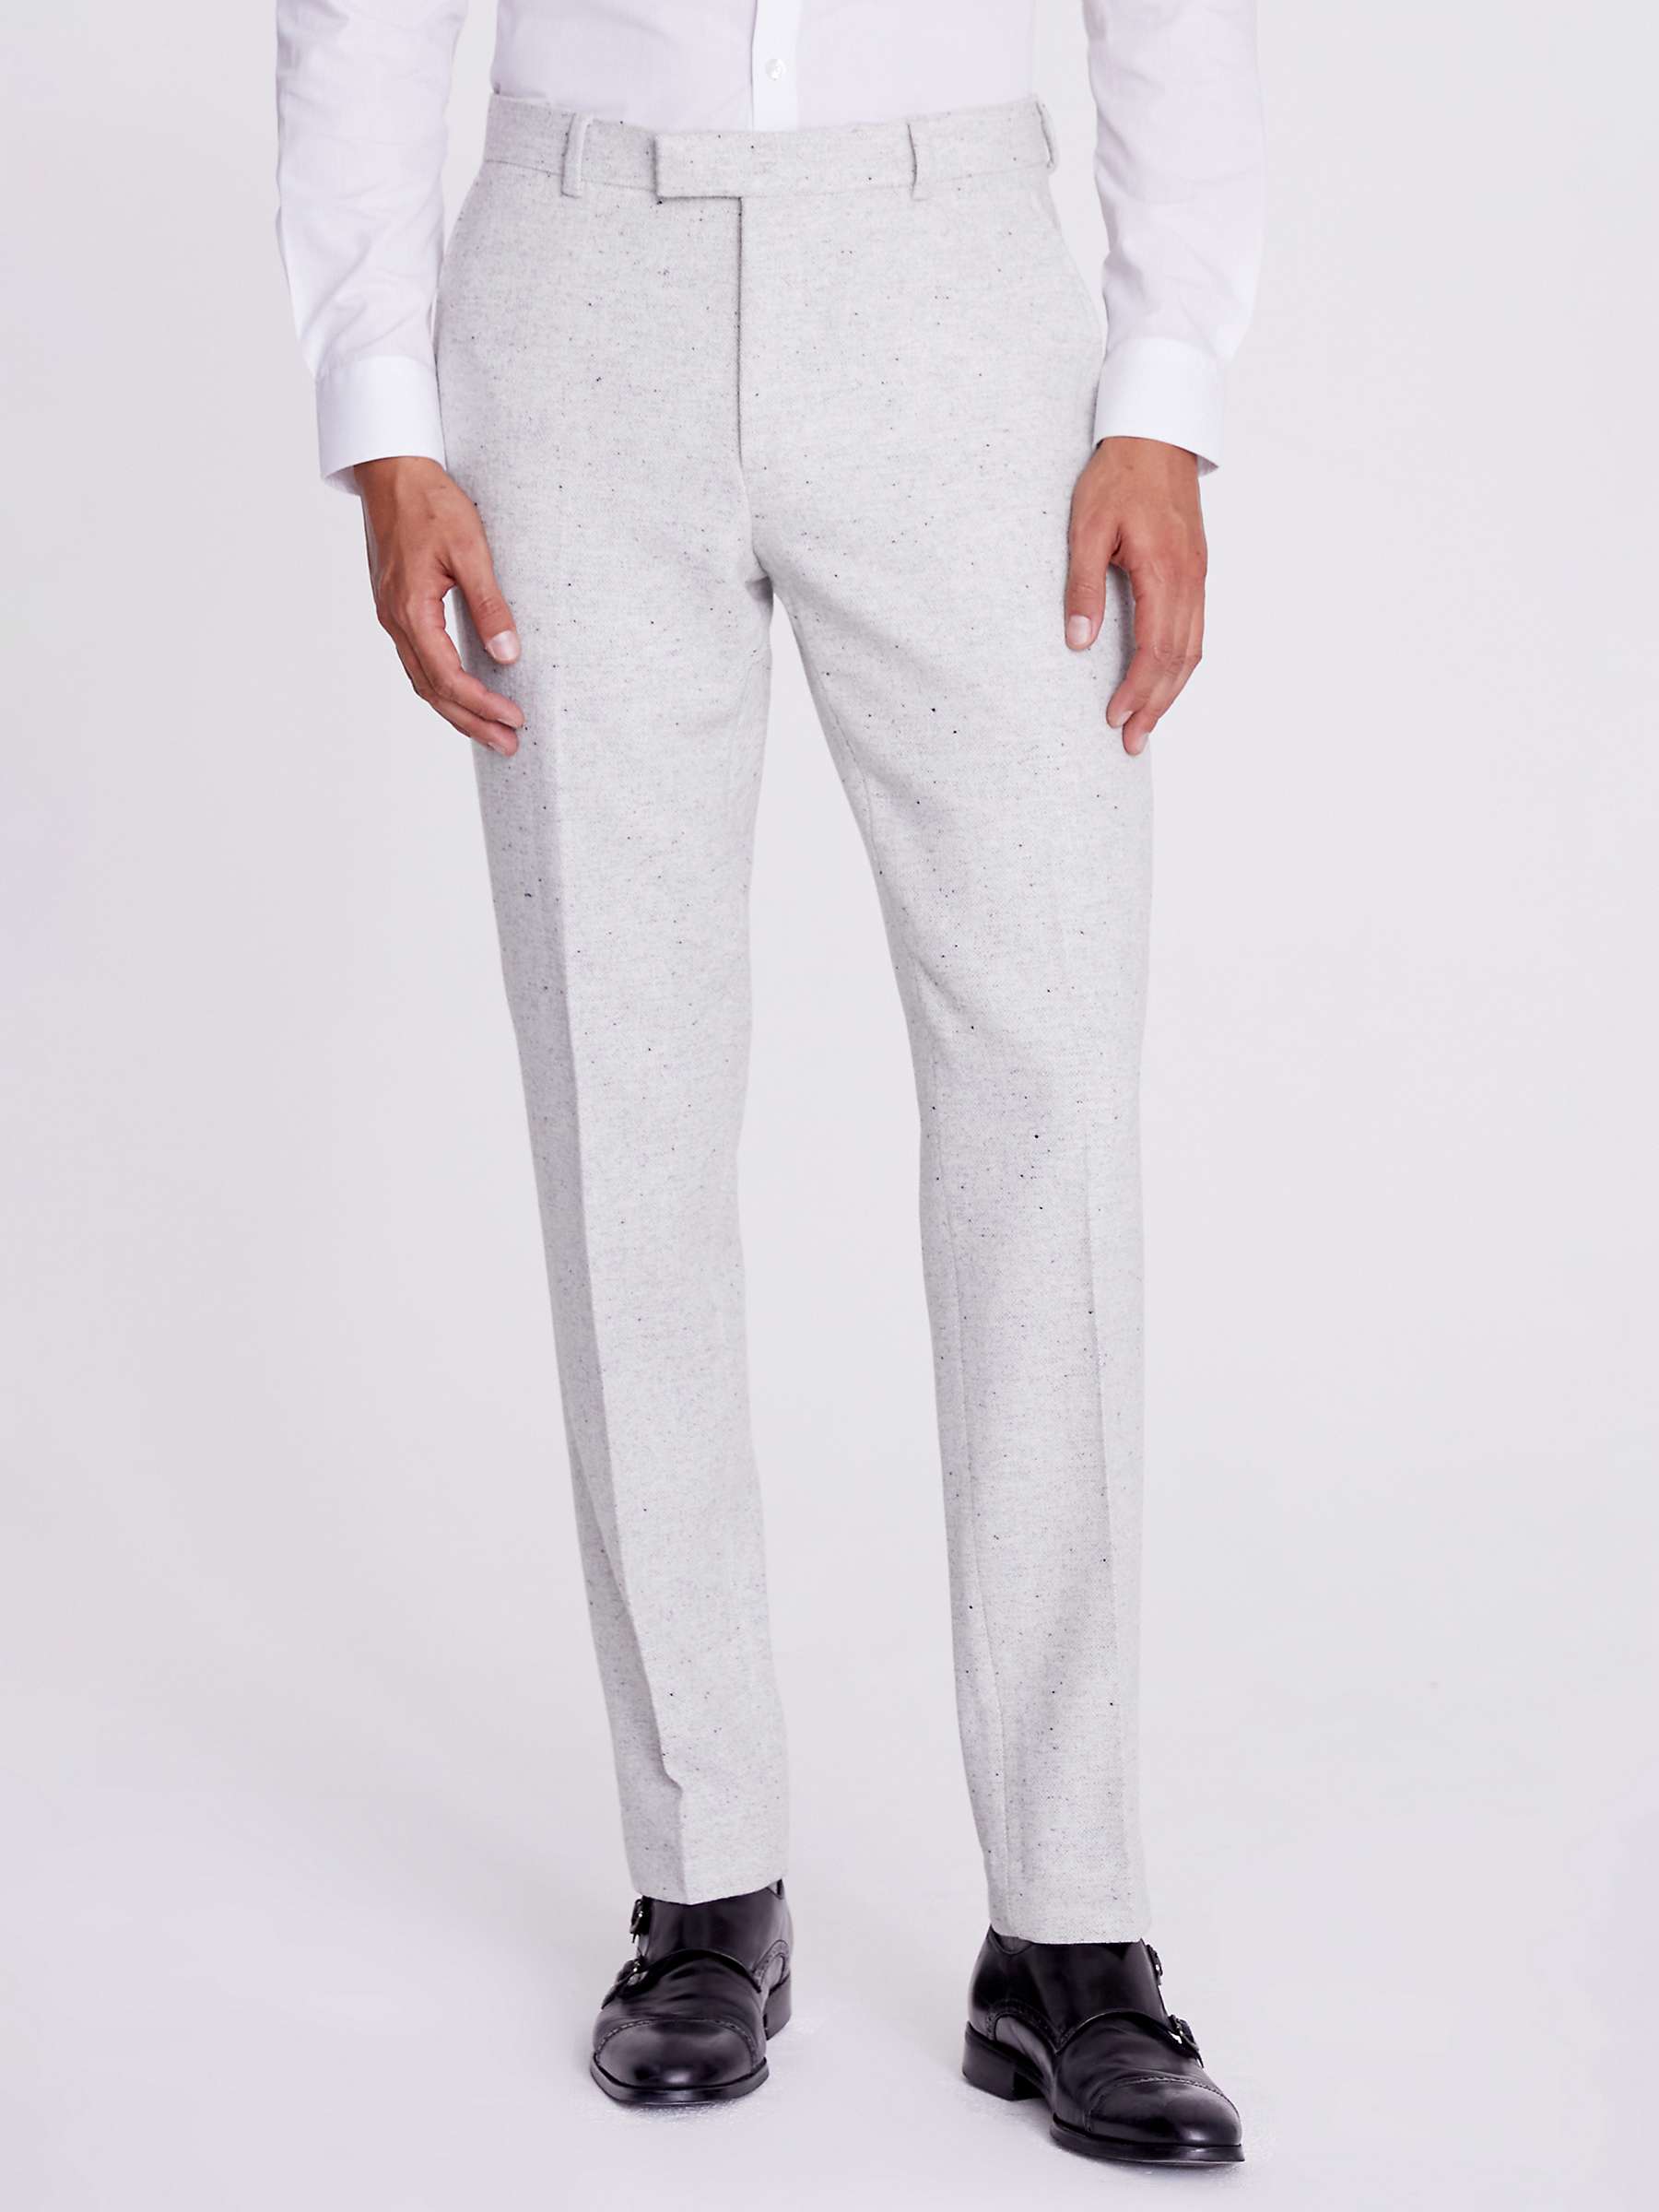 Buy Moss Slim Fit Wool Blend Donegal Suit Trousers Online at johnlewis.com